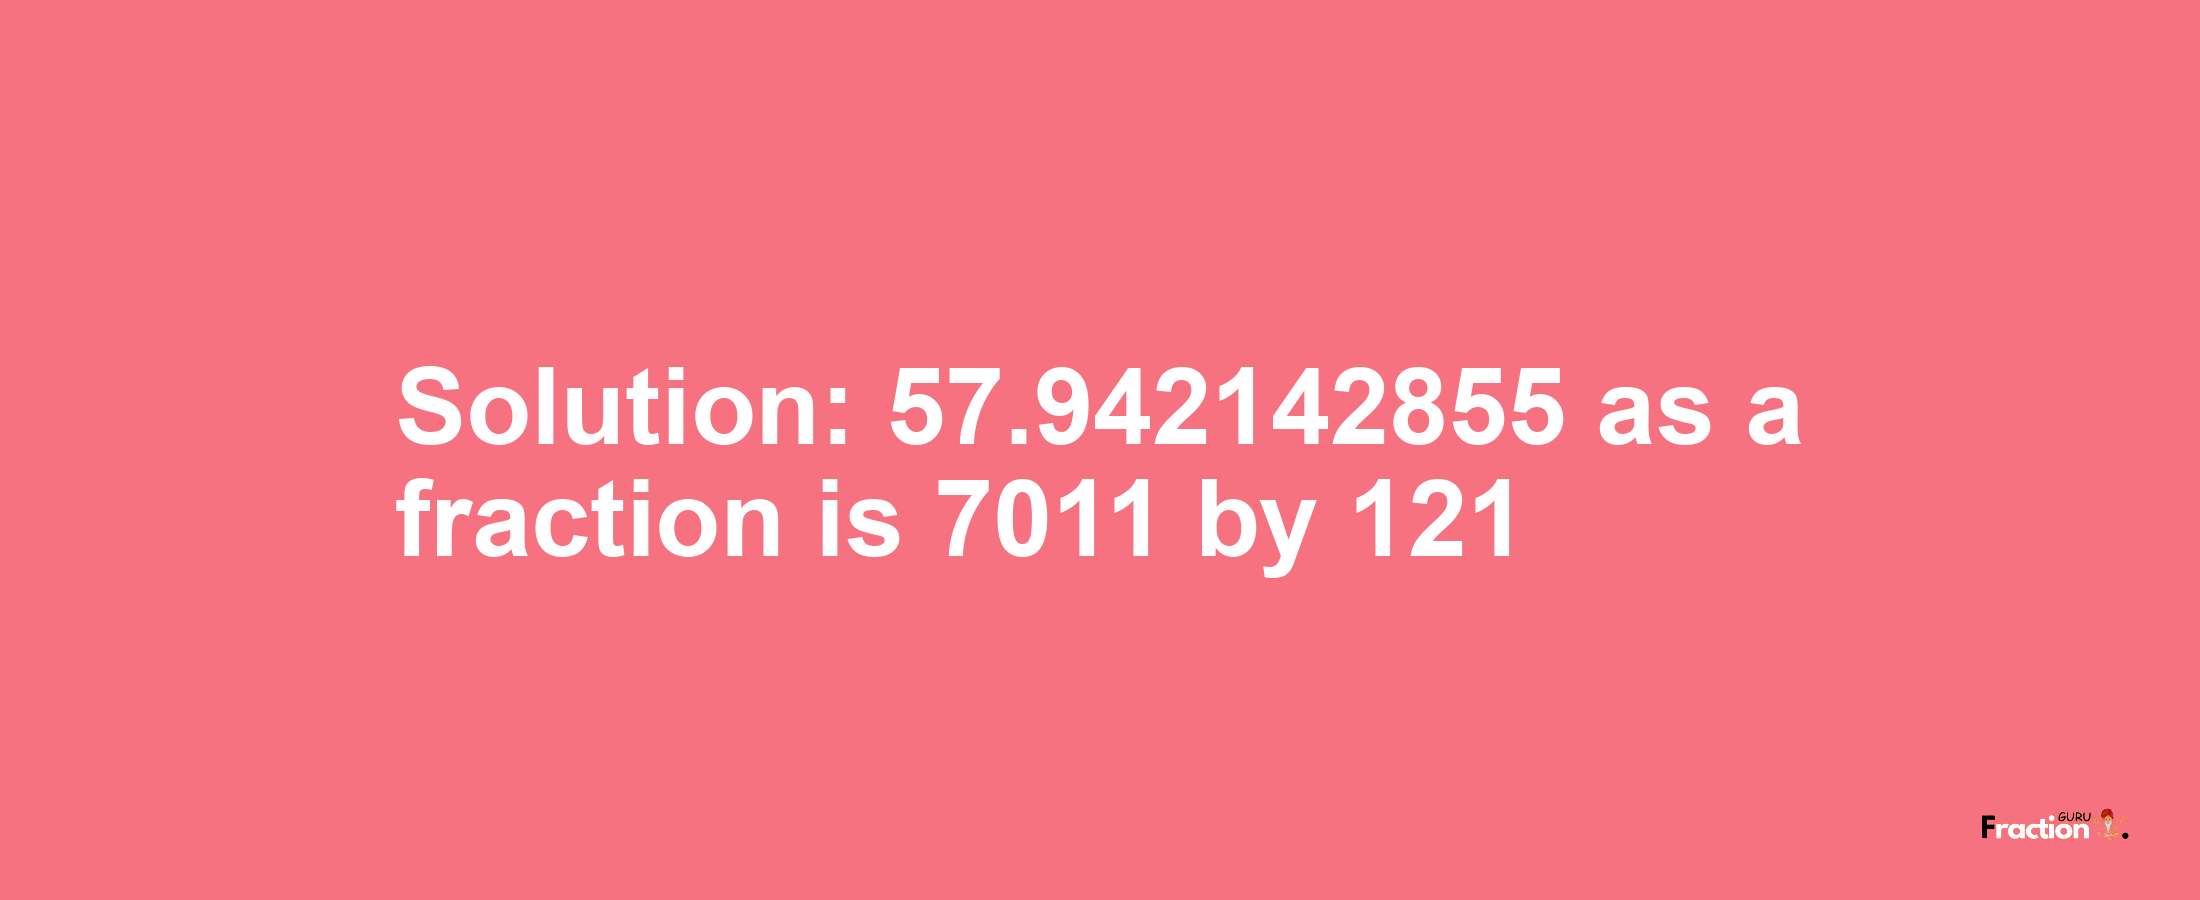 Solution:57.942142855 as a fraction is 7011/121